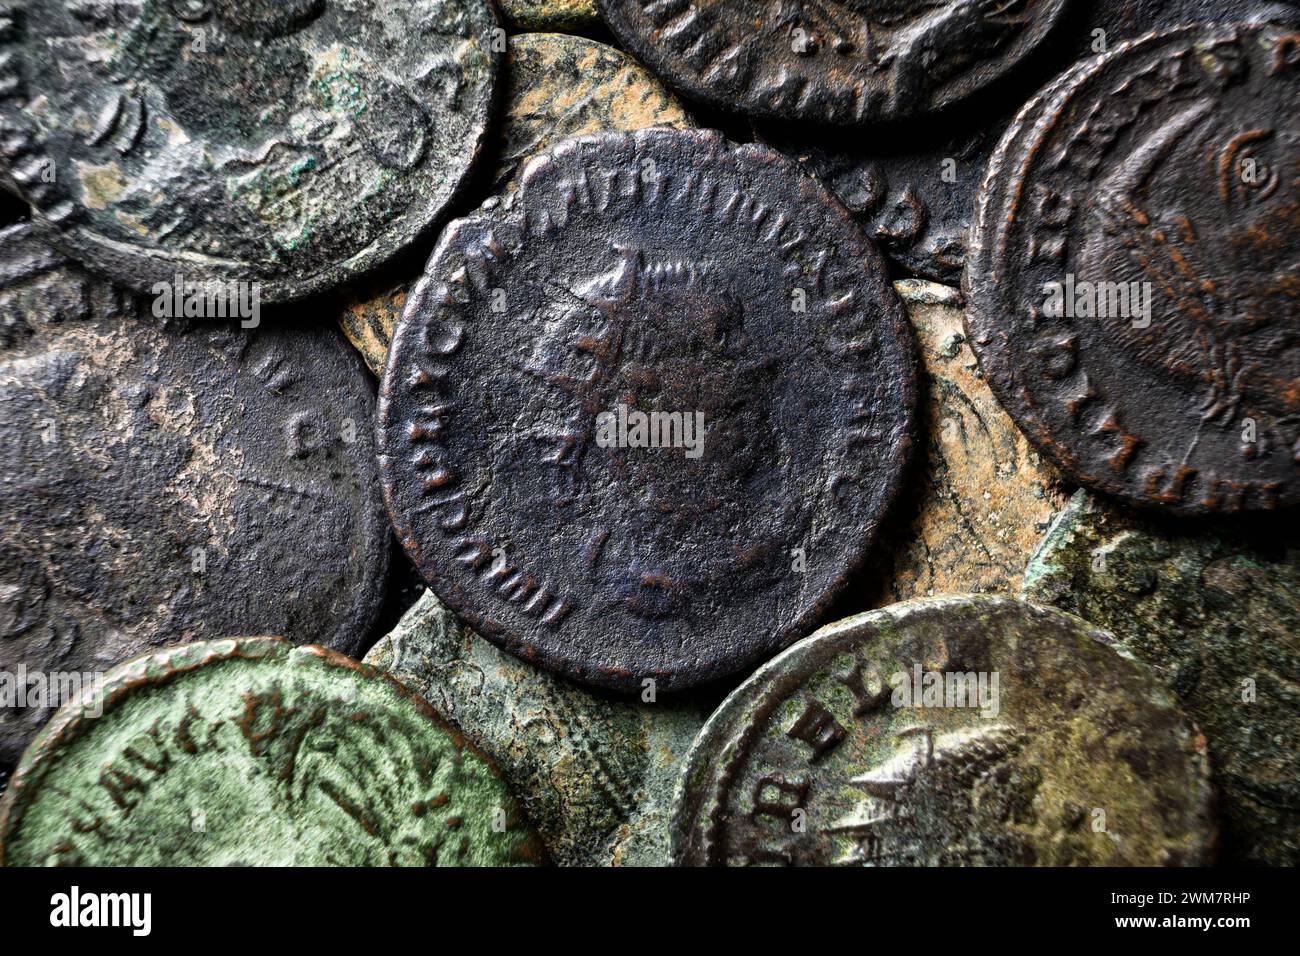 Pile of Ancient Roman coins close-up, pattern of old bronze money with emperors portraits, top view of vintage background. Concept of Rome, Empire, te Stock Photo